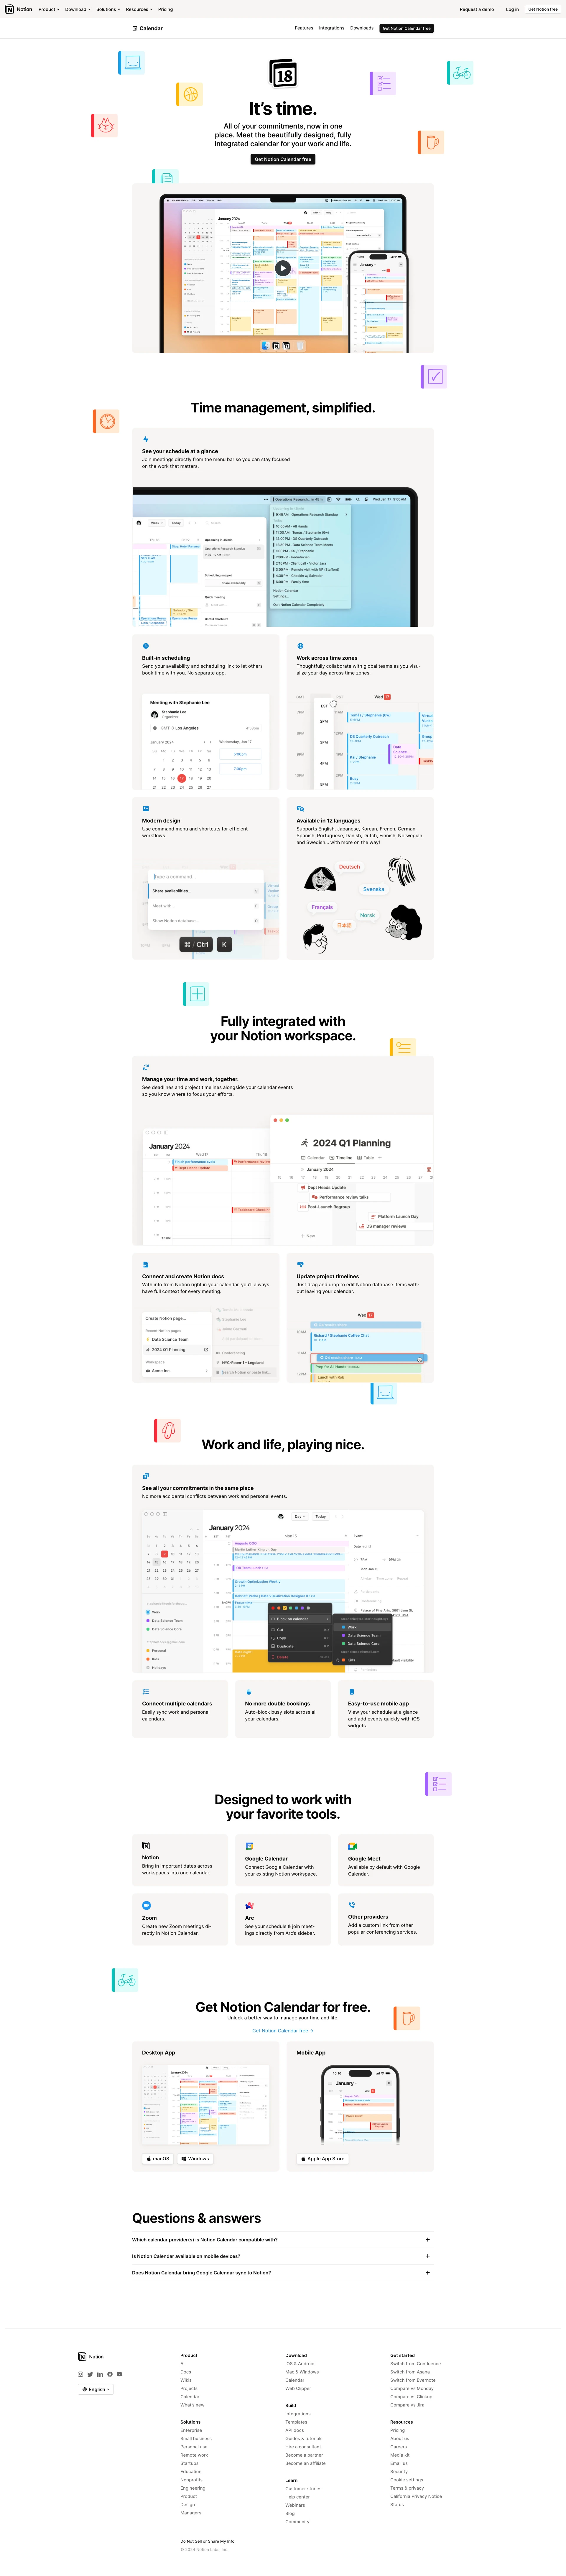 Notion Landing Page Example: A new tool that blends your everyday work apps into one. It's the all-in-one workspace for you and your team.